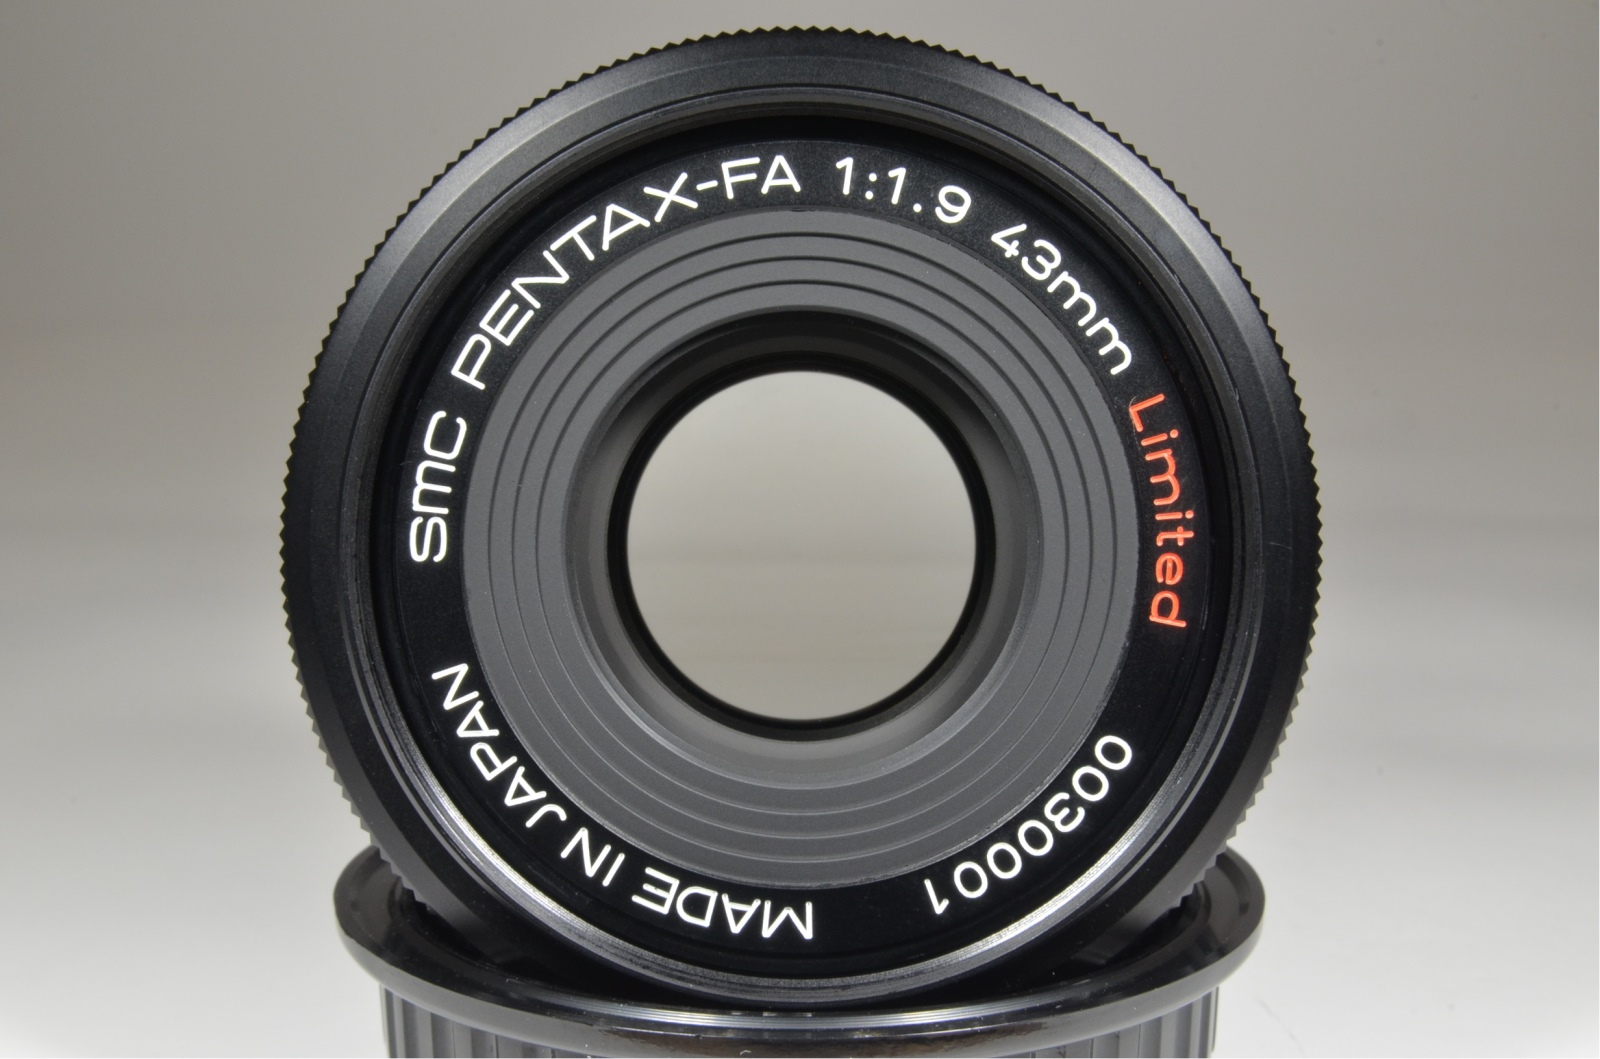 pentax smc fa 43mm f1.9 black limited lens made in japan